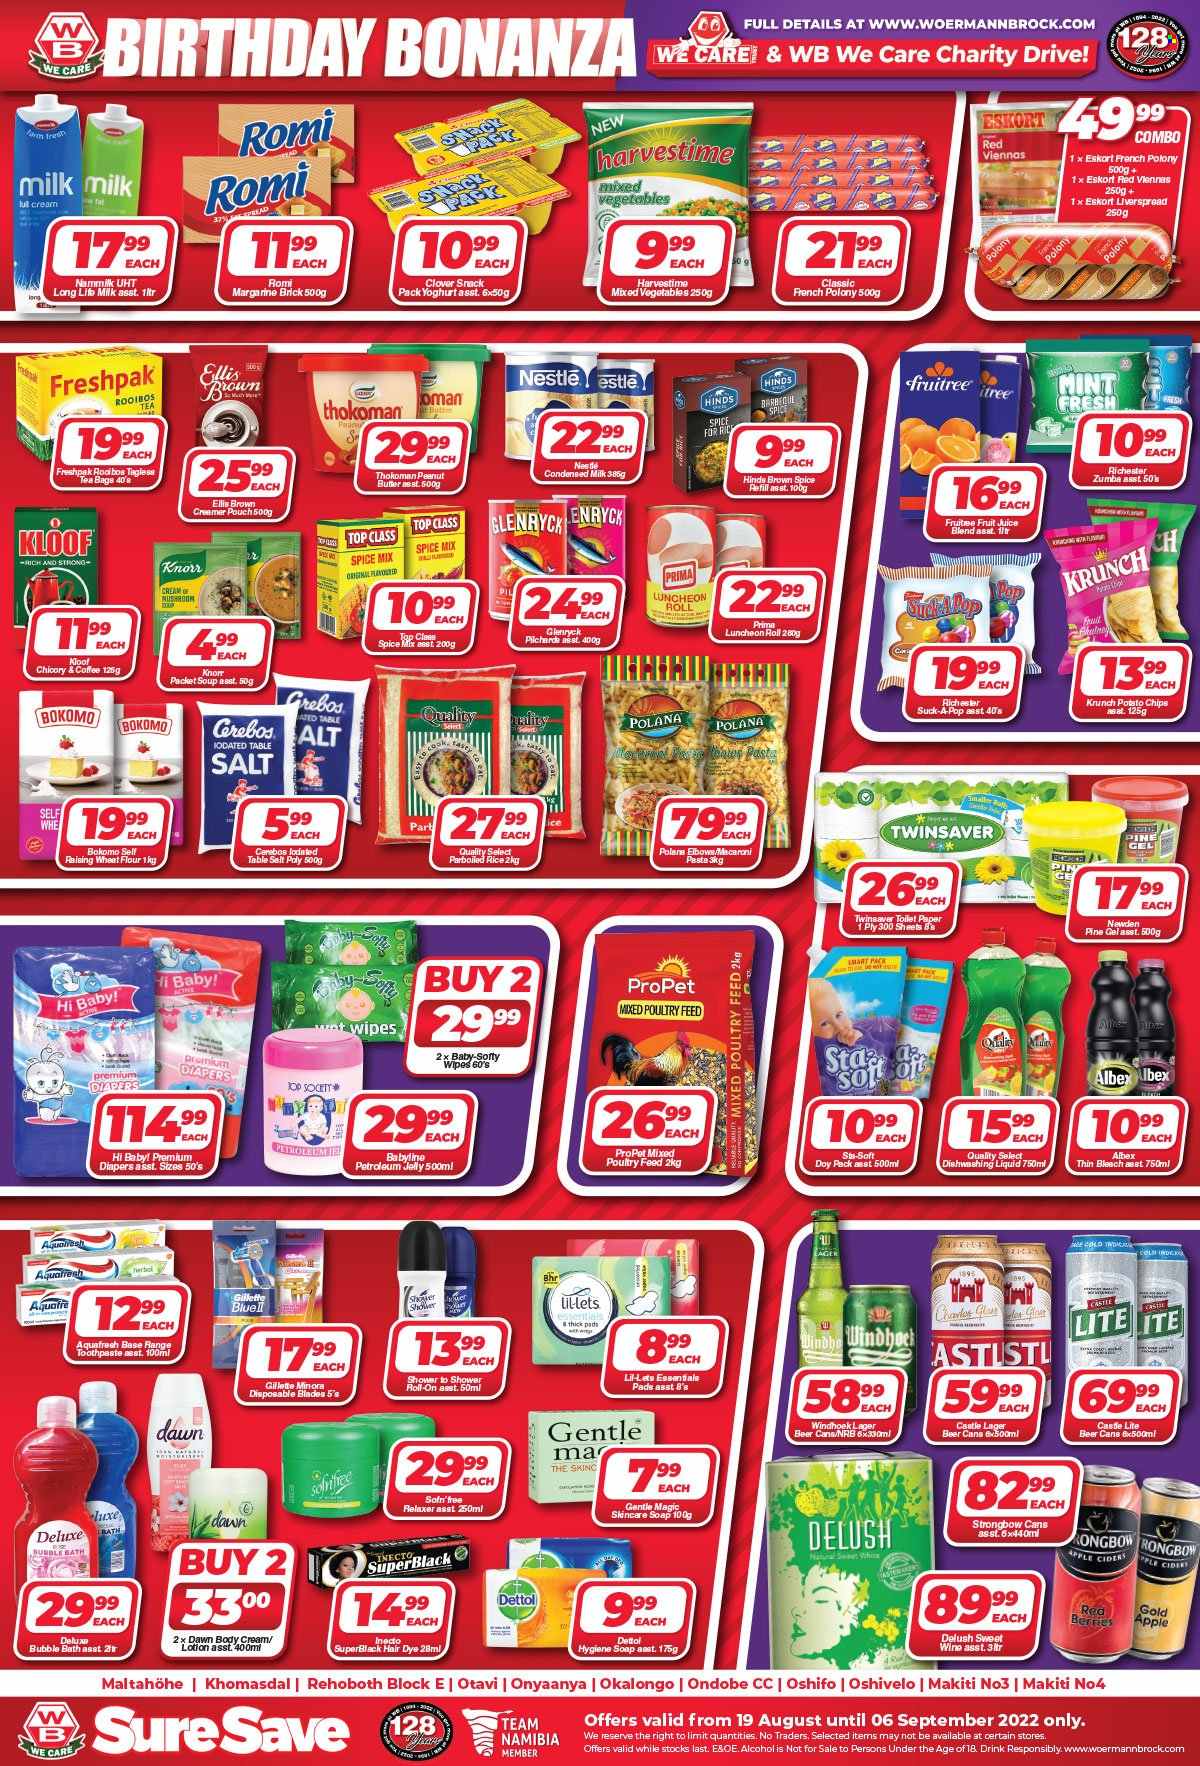 Woermann Brock catalogue  - 19/08/2022 - 06/09/2022 - Sales products - sardines, soup, Knorr, french polony, polony, vienna sausage, lunch meat, yoghurt, Clover, milk, long life milk, condensed milk, Ellis Brown, margarine, mixed vegetables, Harvestime, Nestlé, potato chips, chips, flour, wheat flour, rice, parboiled rice, spice, Hinds, peanut butter, fruit juice, juice, tea bags, rooibos tea, coffee, wine, alcohol, beer, Castle, Lager, wipes, nappies, toilet paper, Dettol, bleach, dishwashing liquid, bubble bath, soap, toothpaste, Lil-lets, petroleum jelly, Gentle Magic, relaxer, body lotion, roll-on, Sure, Gillette. Page 2.